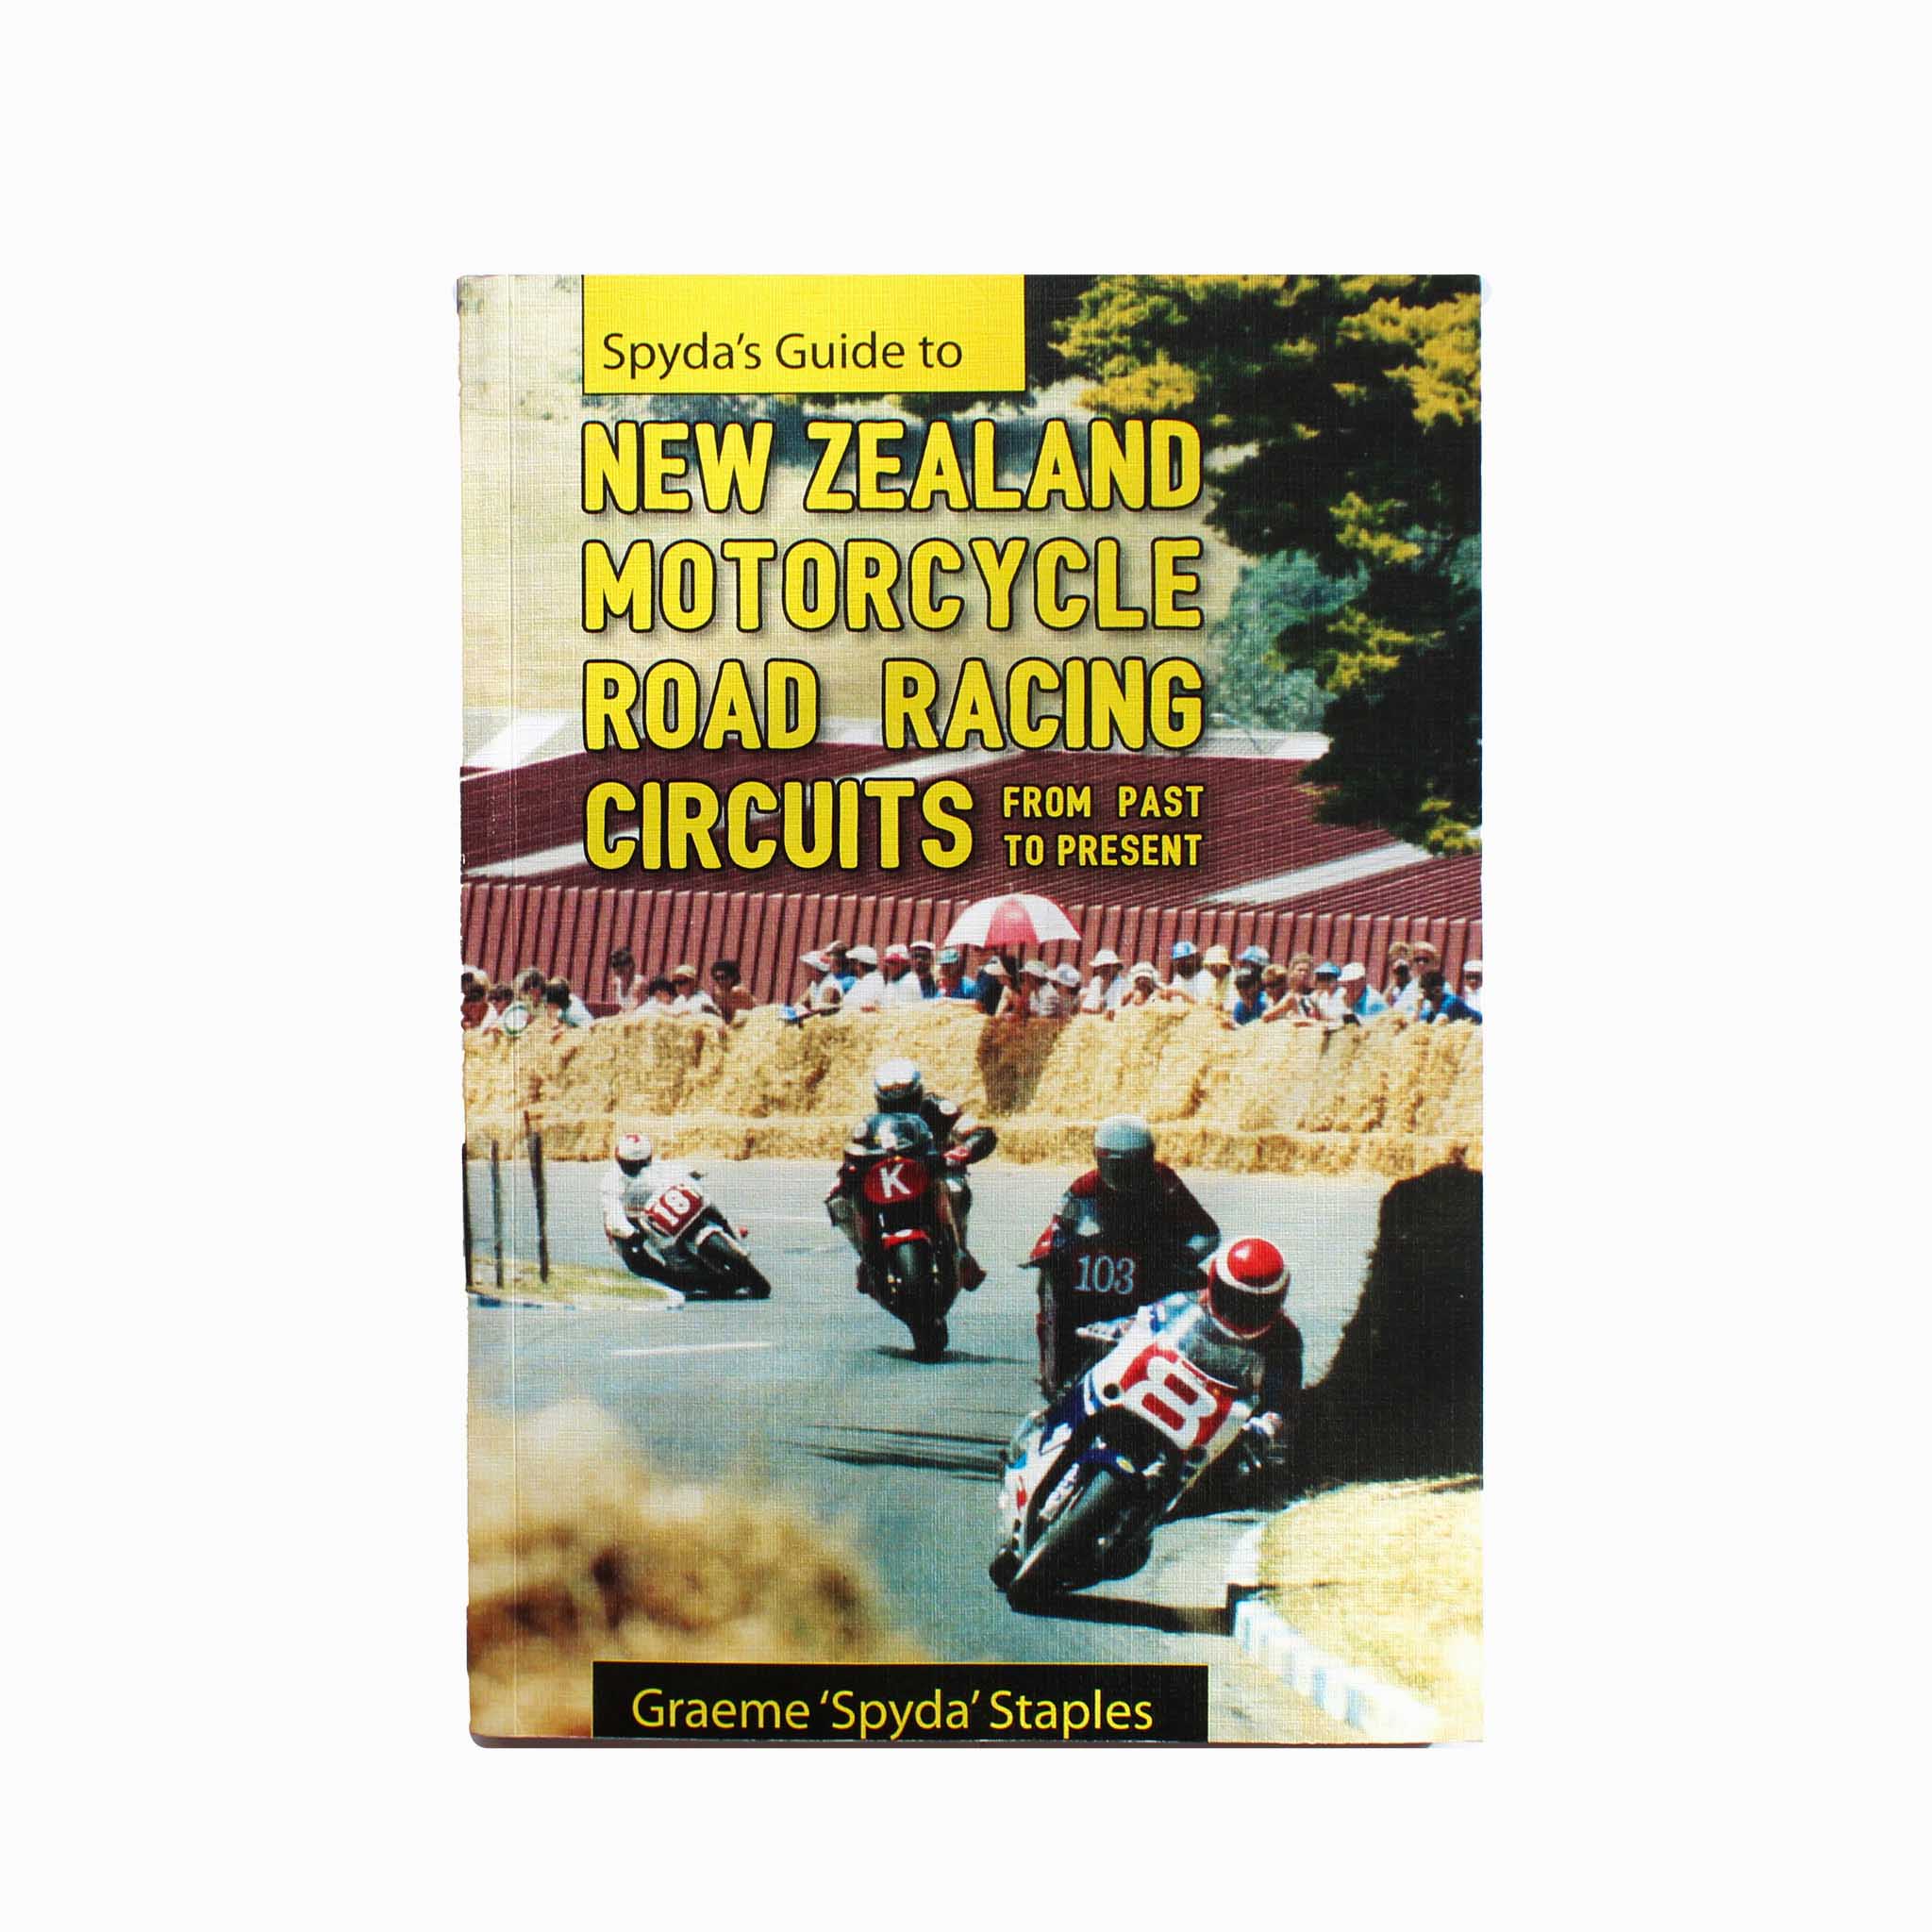 Spyda's Guide to New Zealand Motocycle Road Racing Circuits from past to present